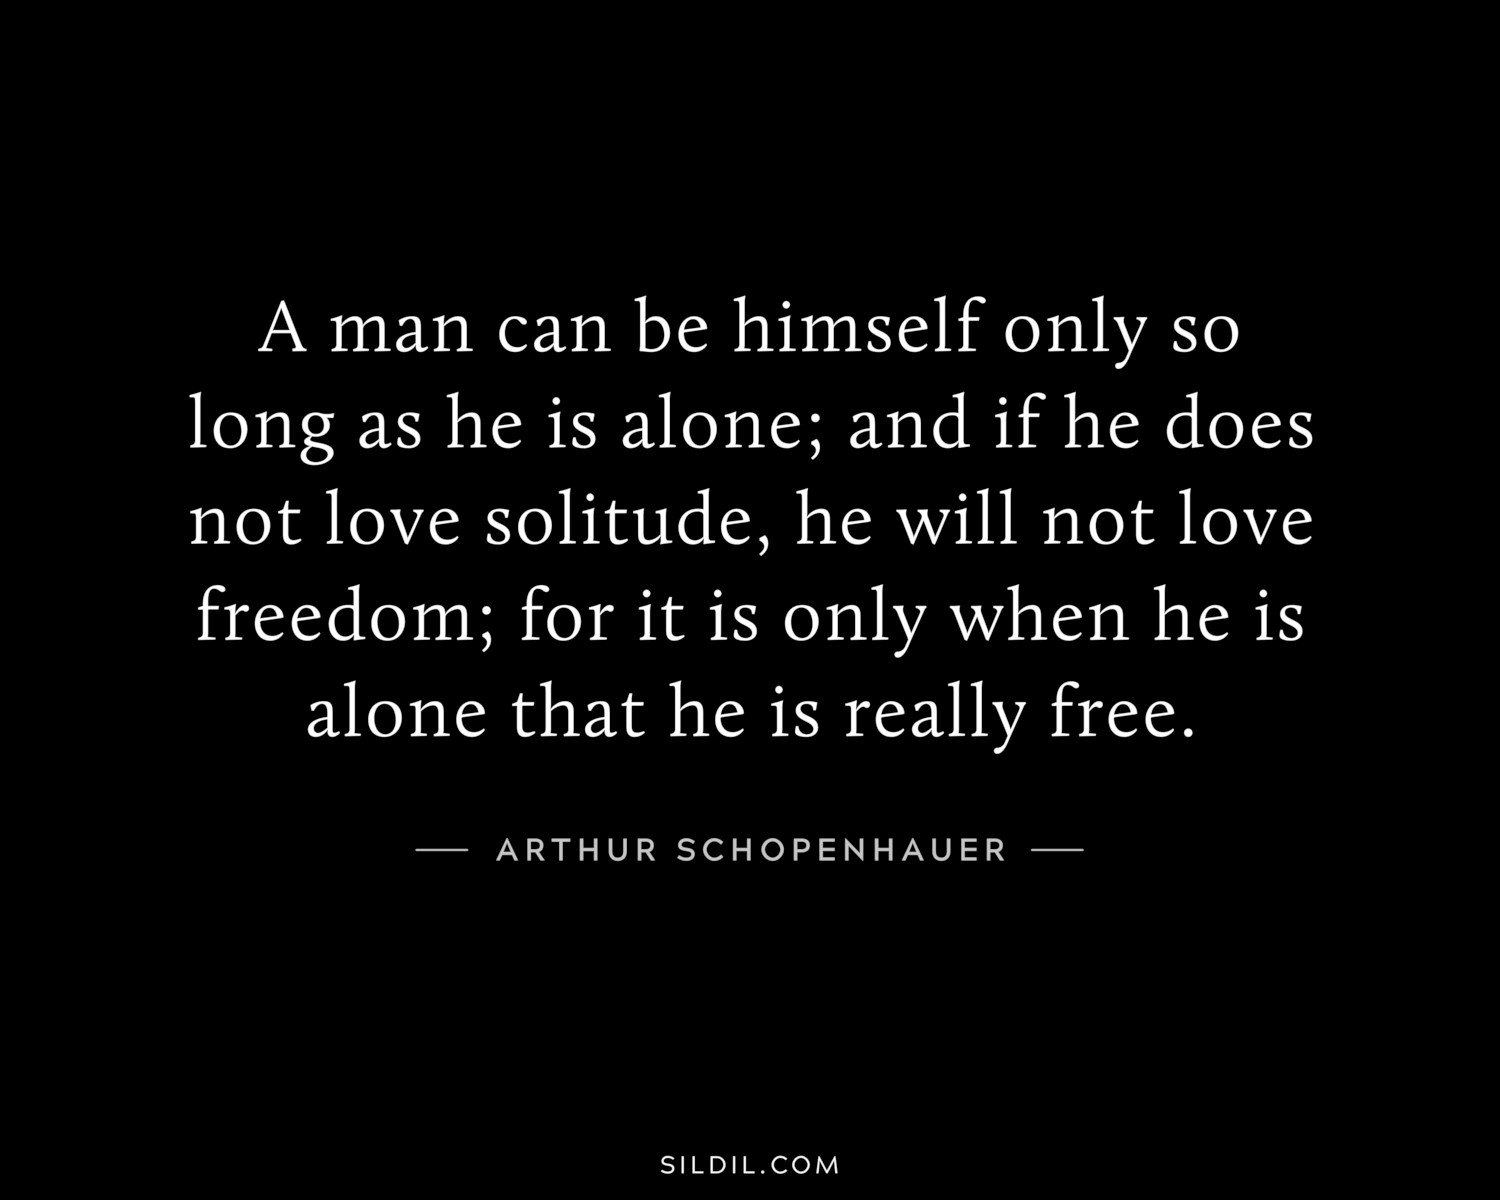 A man can be himself only so long as he is alone; and if he does not love solitude, he will not love freedom; for it is only when he is alone that he is really free.